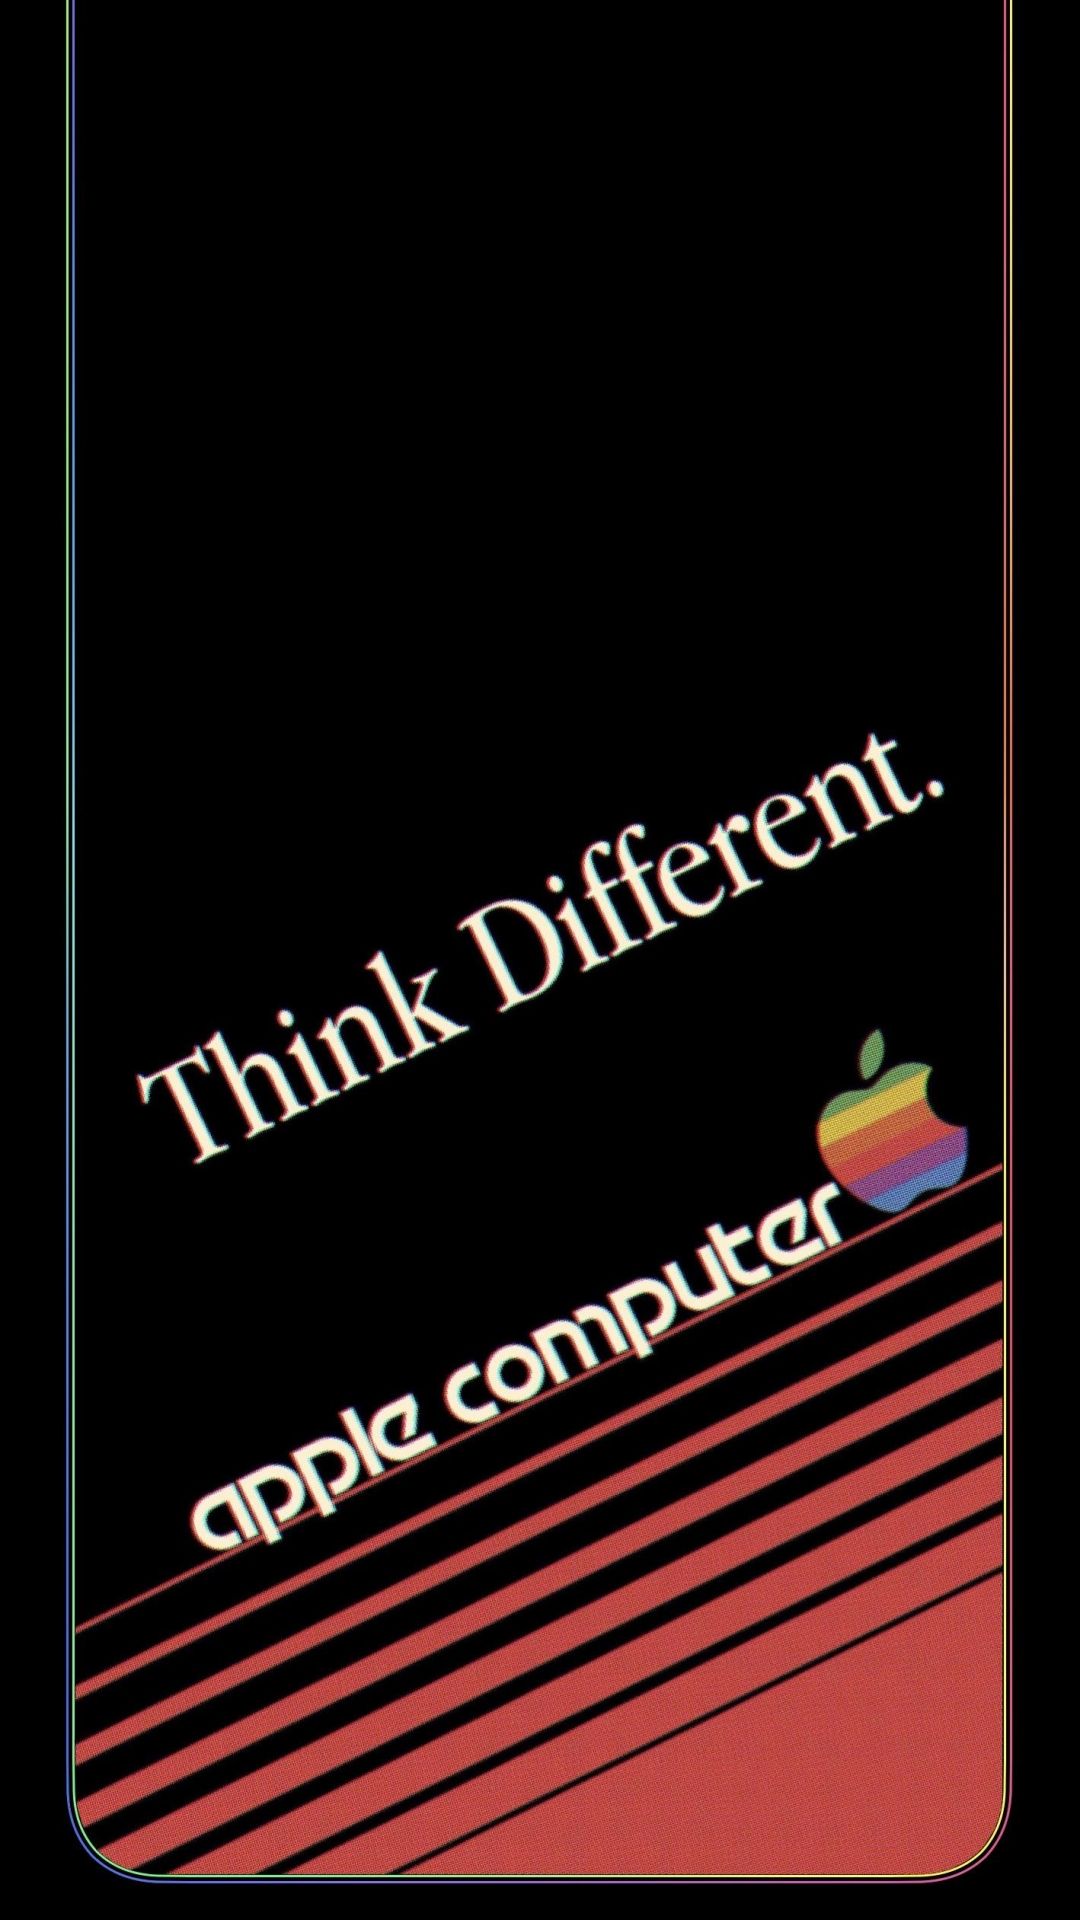 Free download Retro Apple Computer border wallpaper for iPhone XS